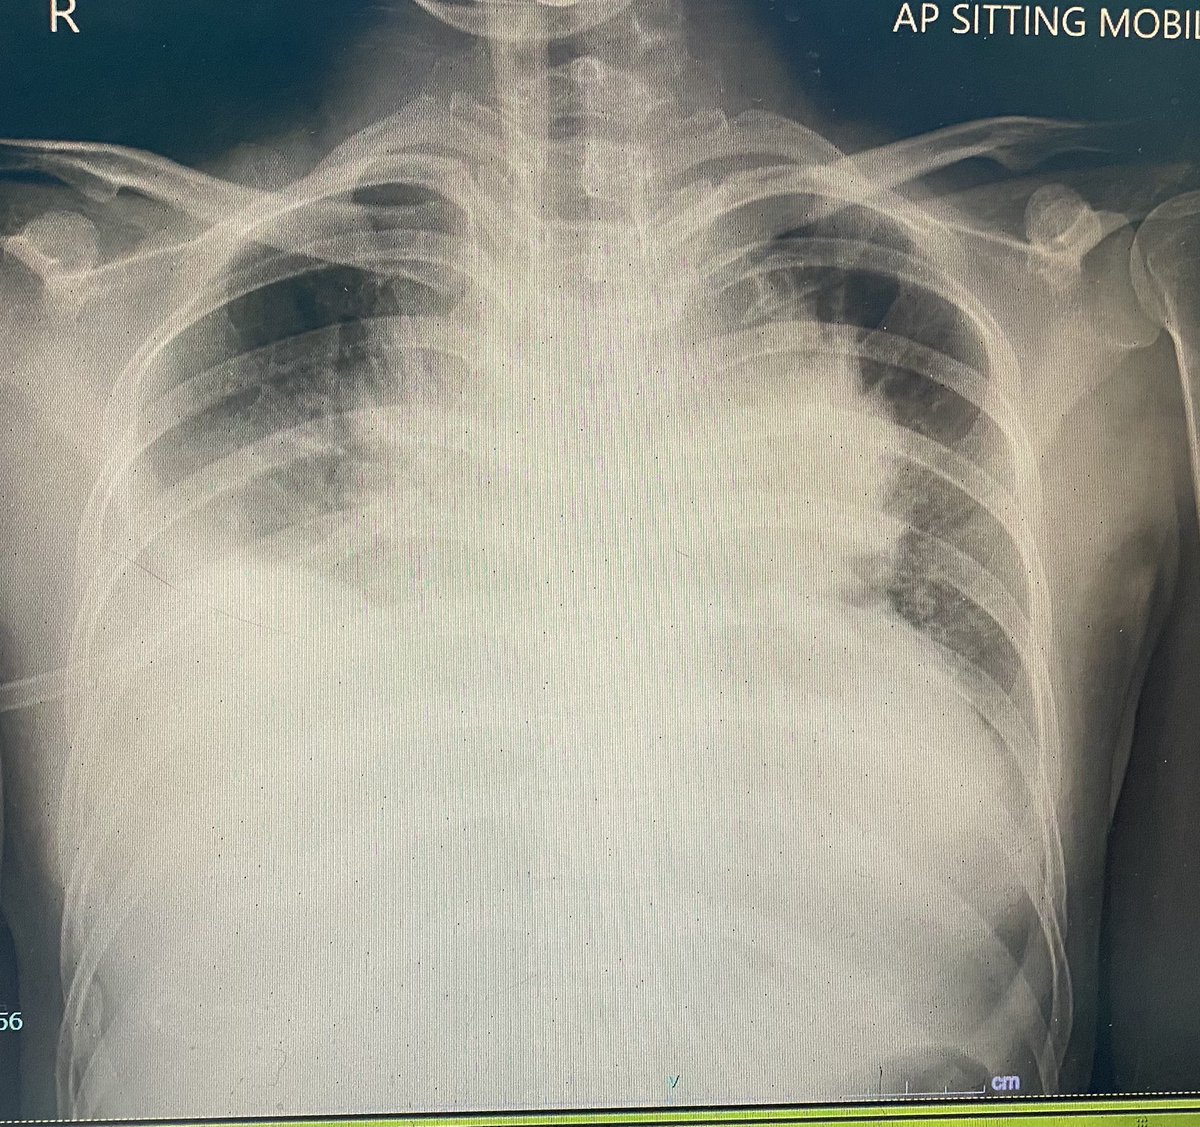 with complaint of shortness of breath and cough. This is her chest xray taken on day of admission. See those whites as compared to the previous one? Yeah, that means bad. Her condition worsened in the ward and she had to be intubated.